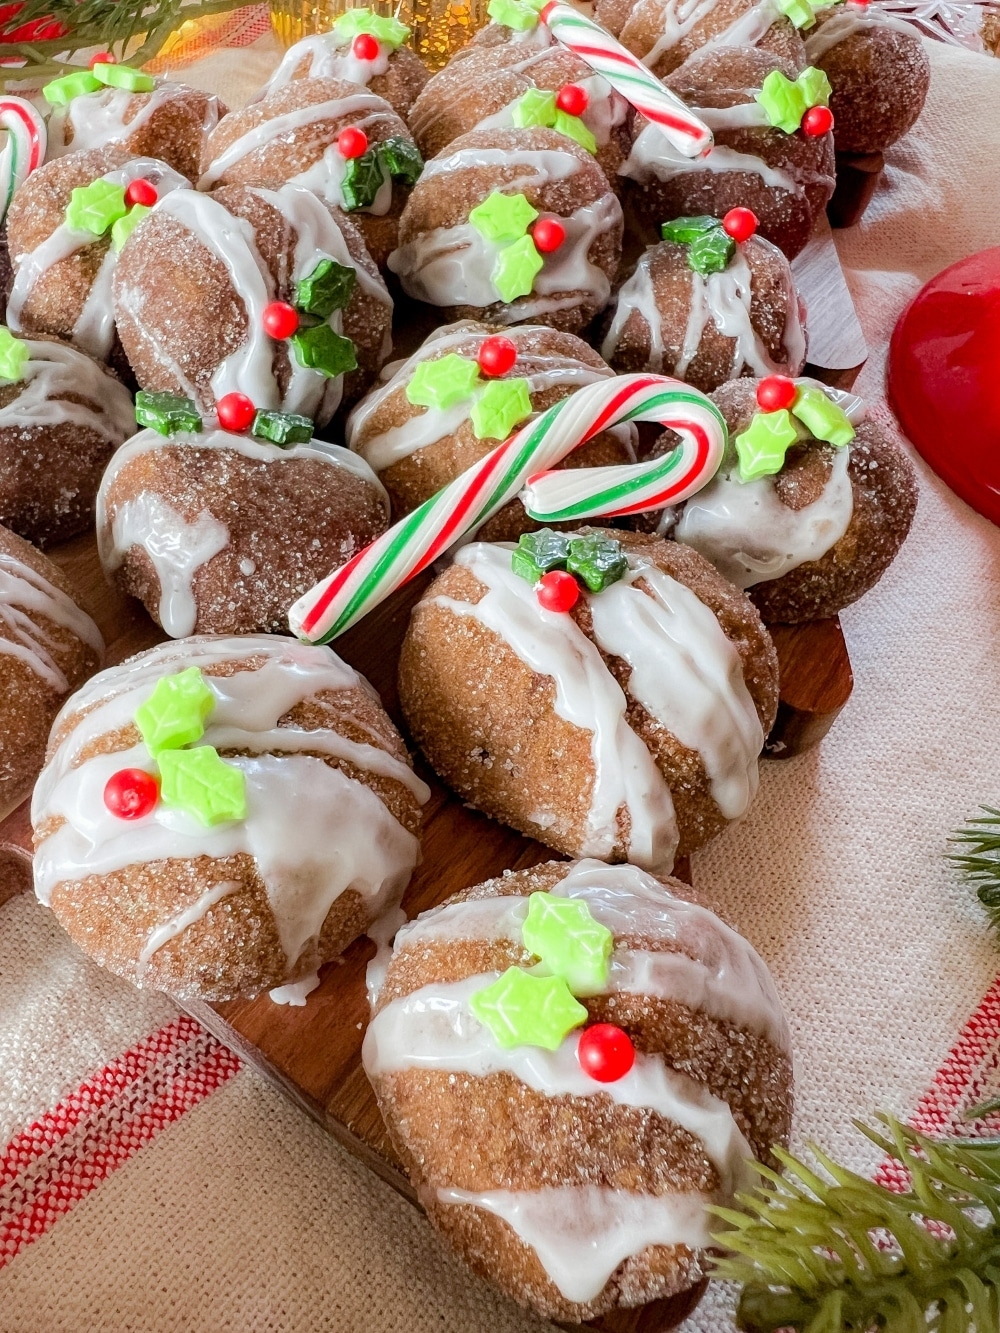 Chewy Soft Christmas Gingerbread Cookies. Bake up holiday joy with my Chewy Soft Christmas Gingerbread Cookies—perfect for exchanges, staying soft, and easy make-ahead.